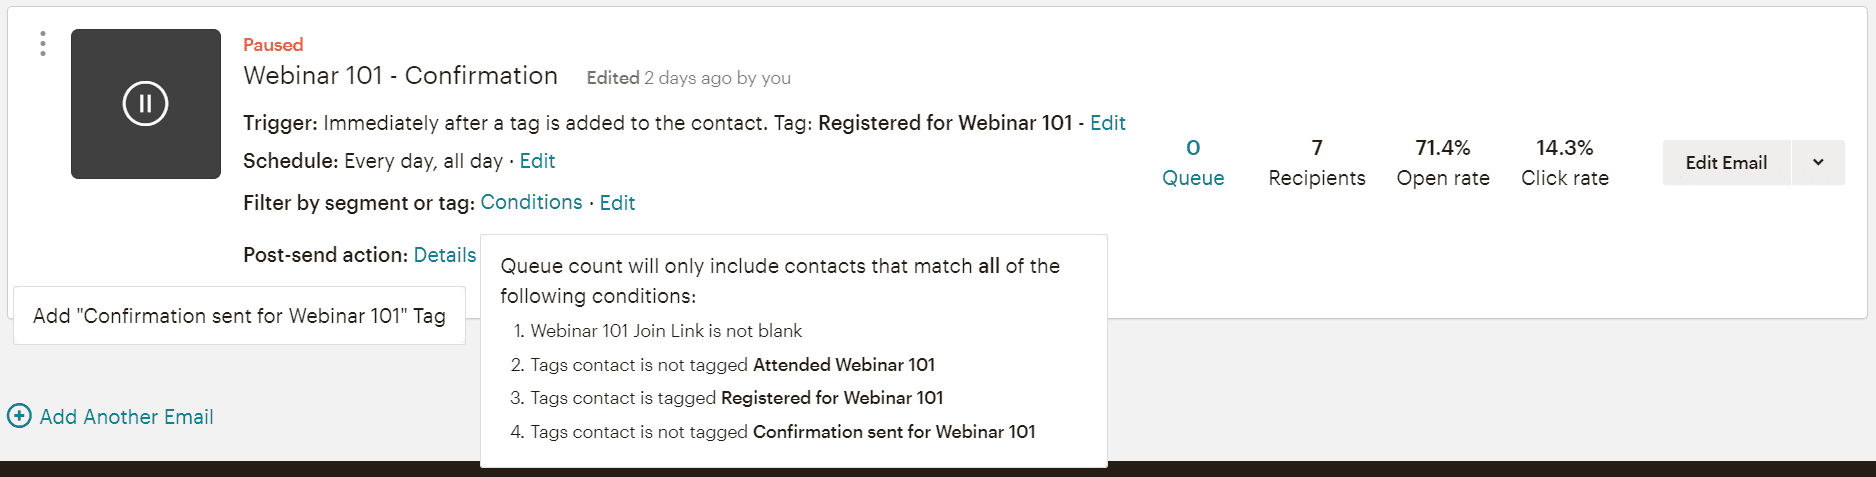 Conditions under which the webinar confirmation is sent